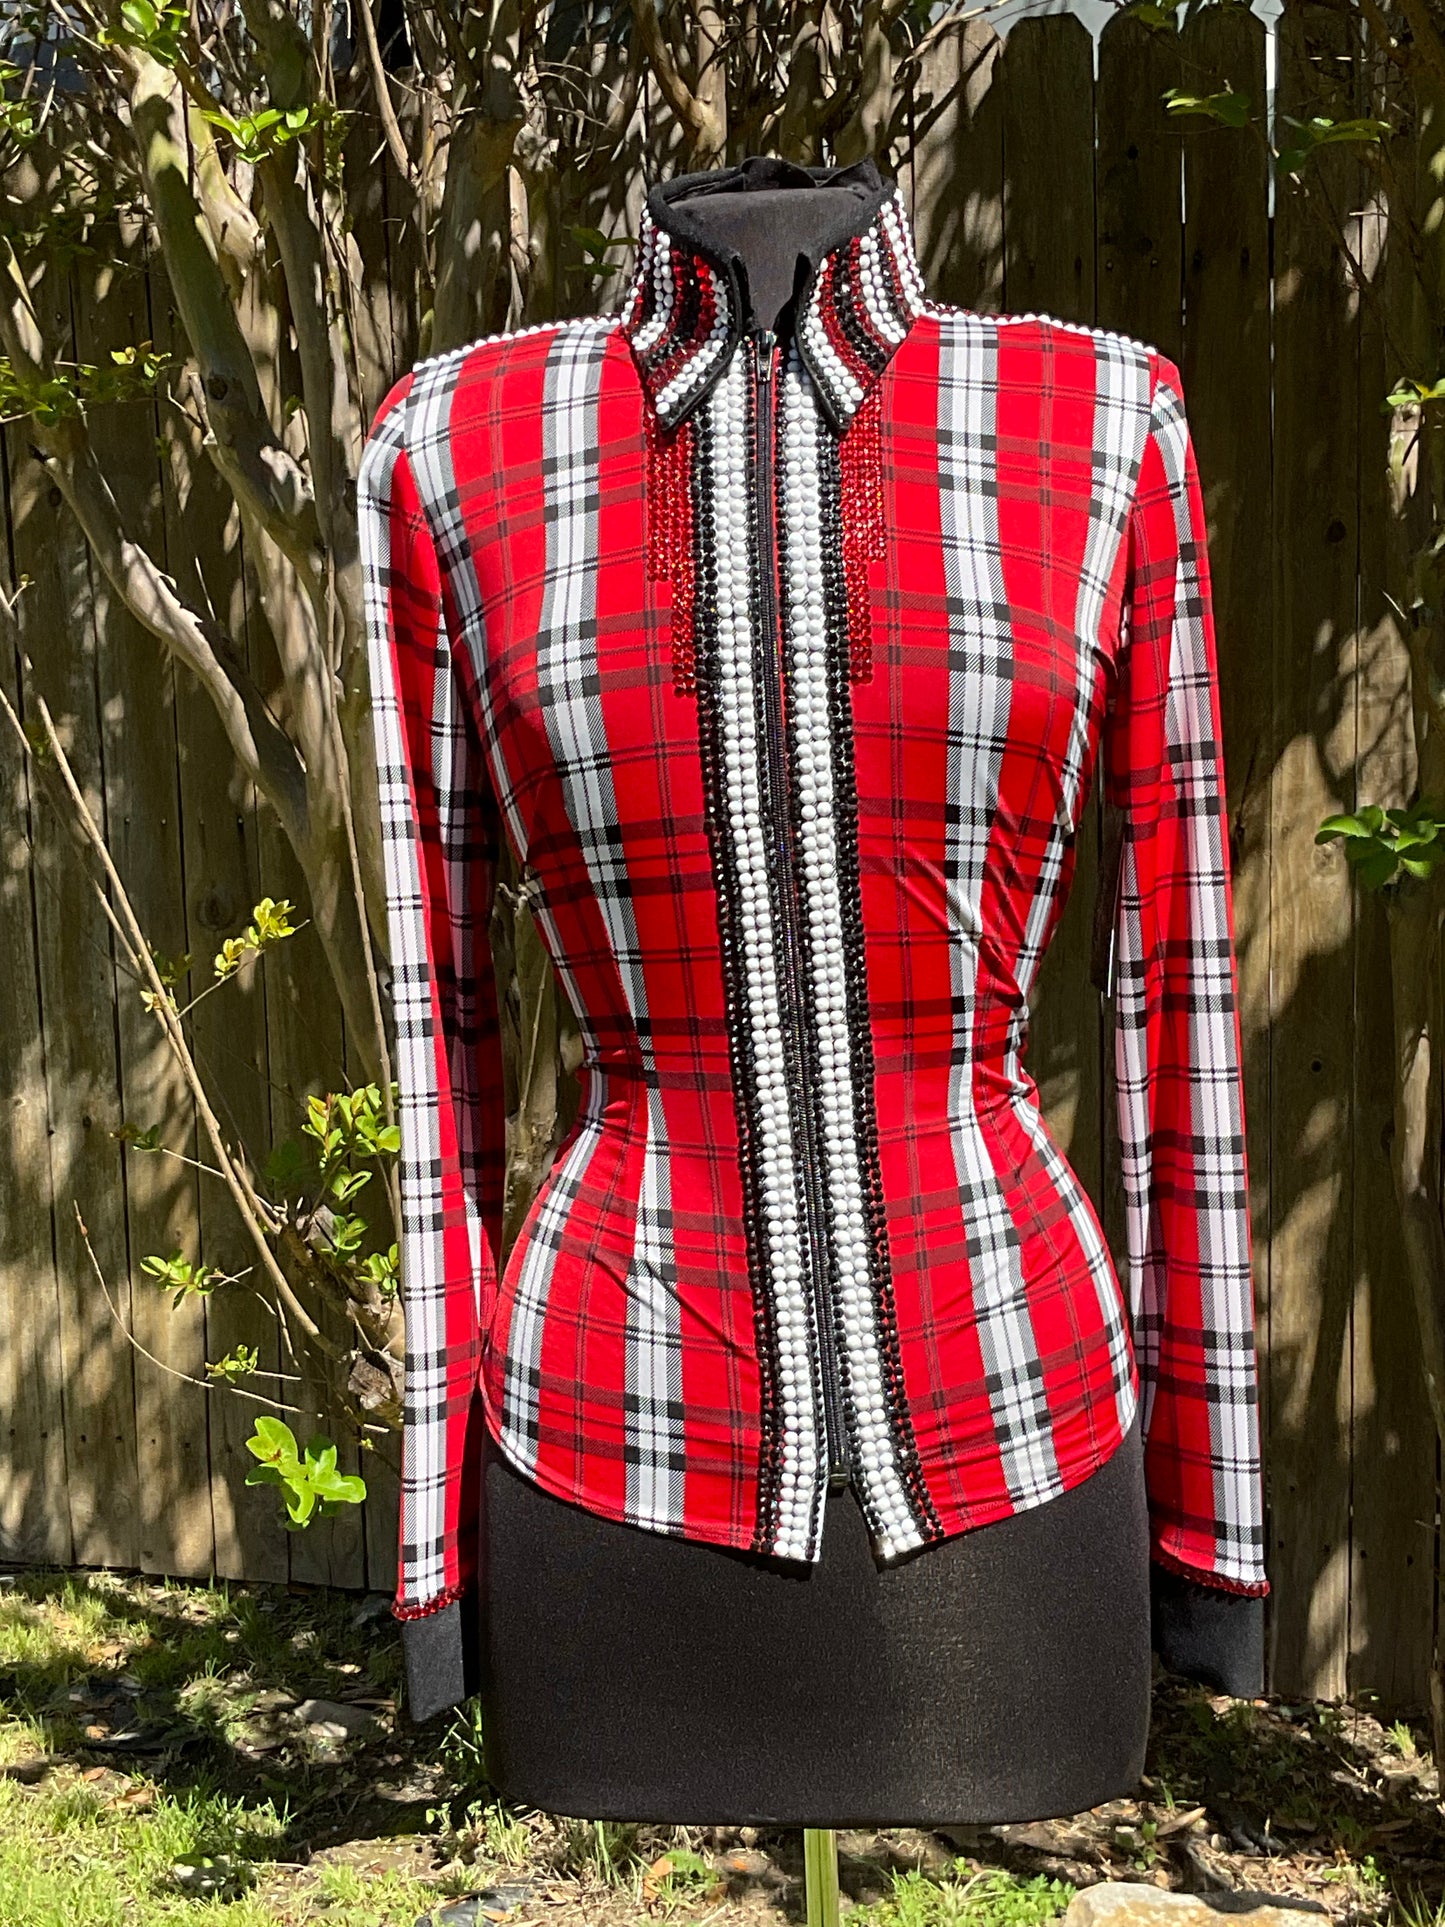 Size medium stretch Red and Black Plaid with whites